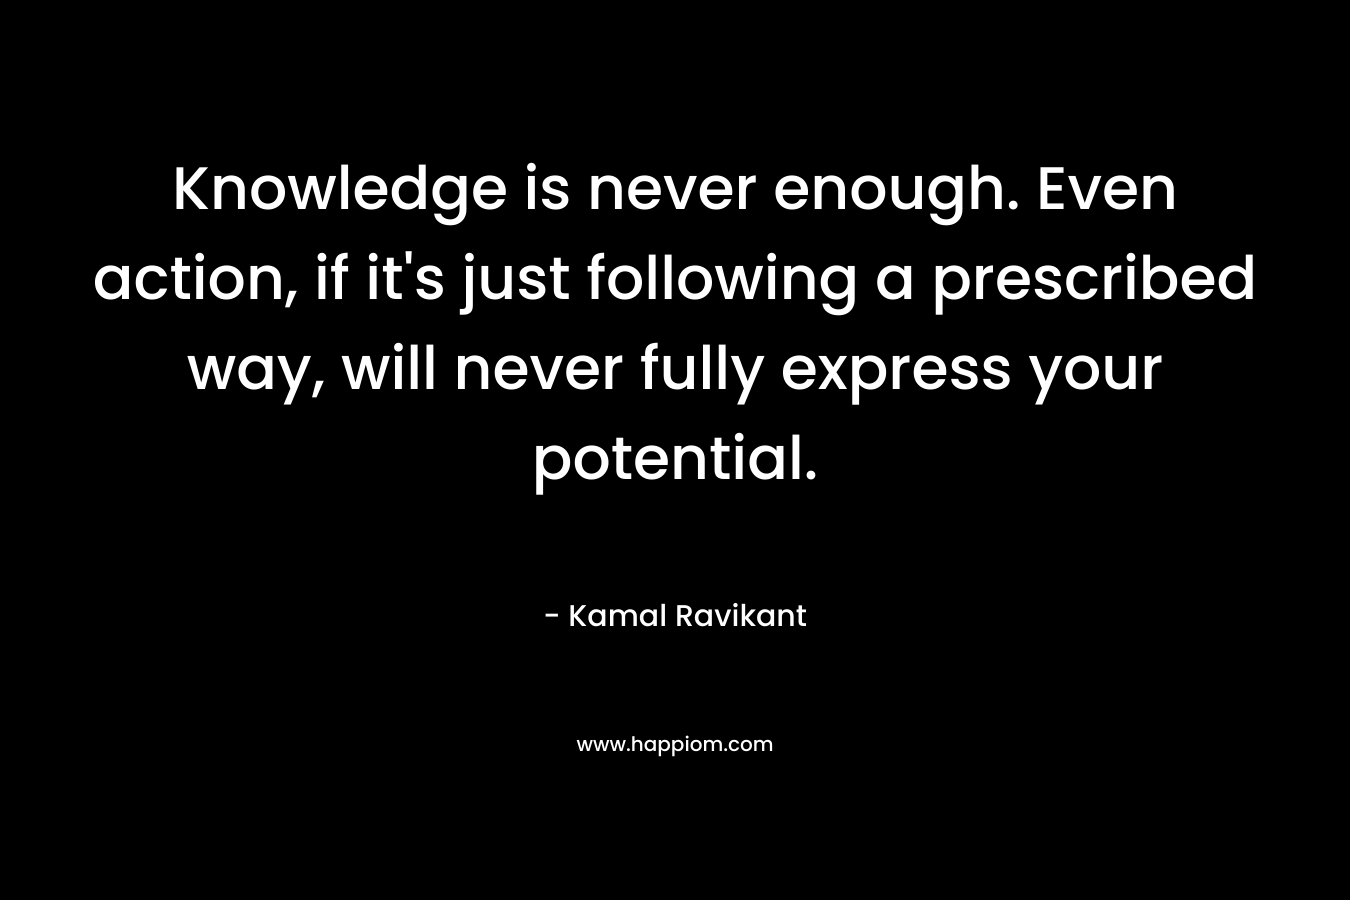 Knowledge is never enough. Even action, if it’s just following a prescribed way, will never fully express your potential. – Kamal Ravikant